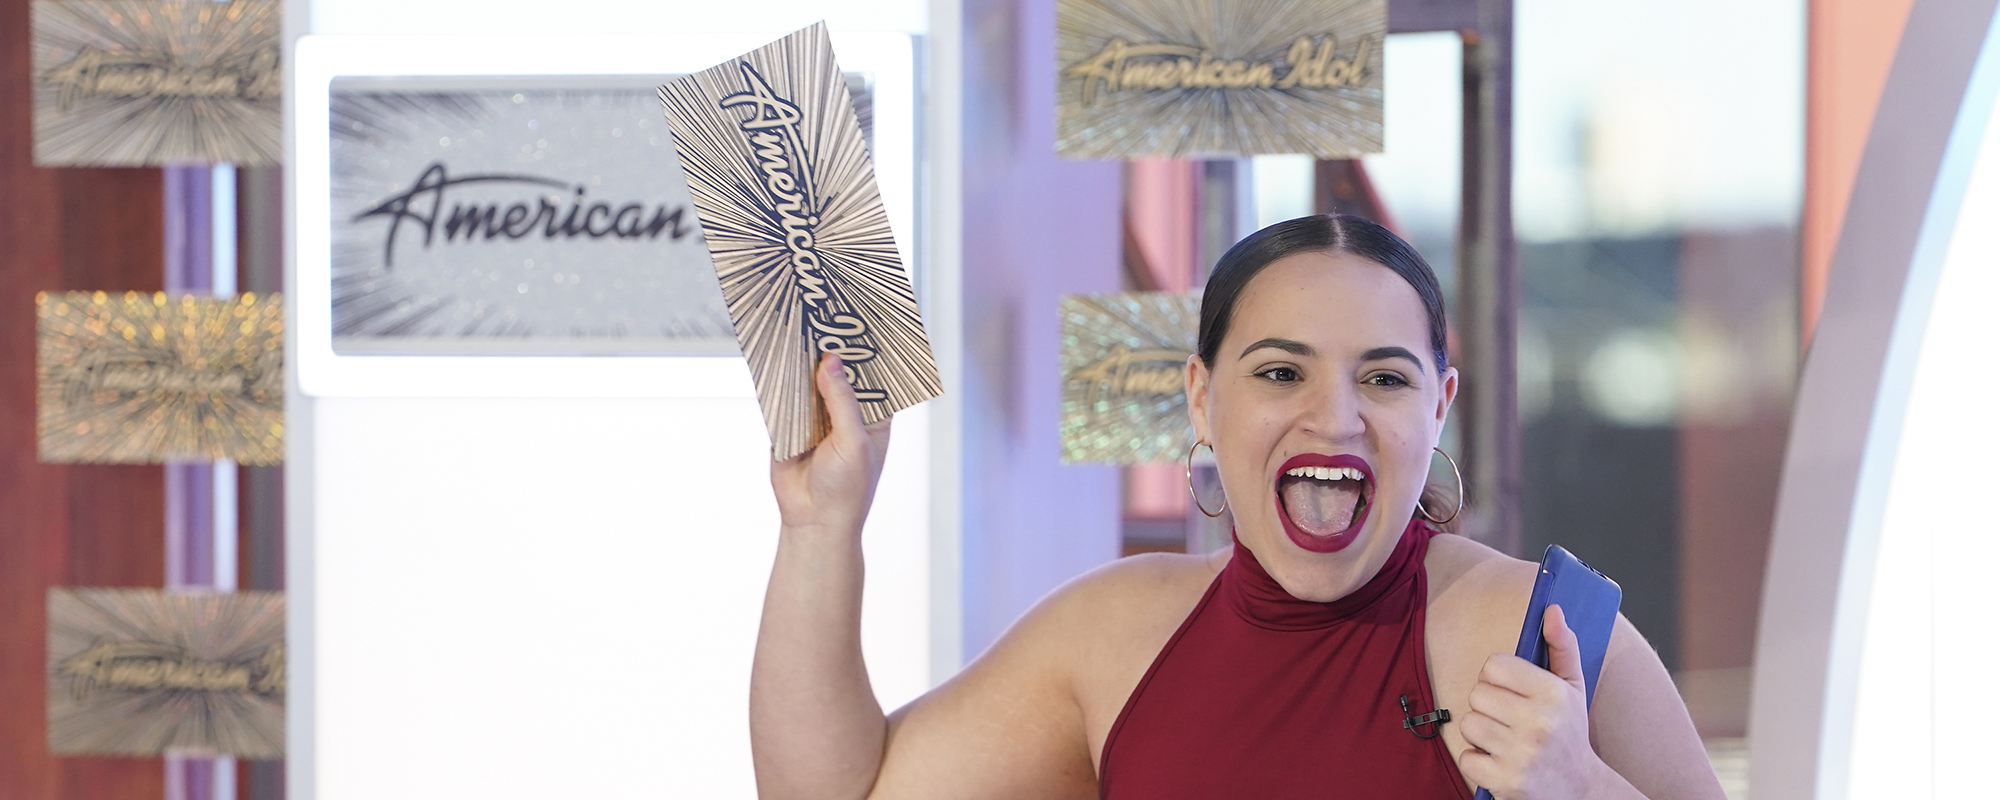 Amara Valerio Wows ‘American Idol’ Judges with Her Voice and Revenge Story